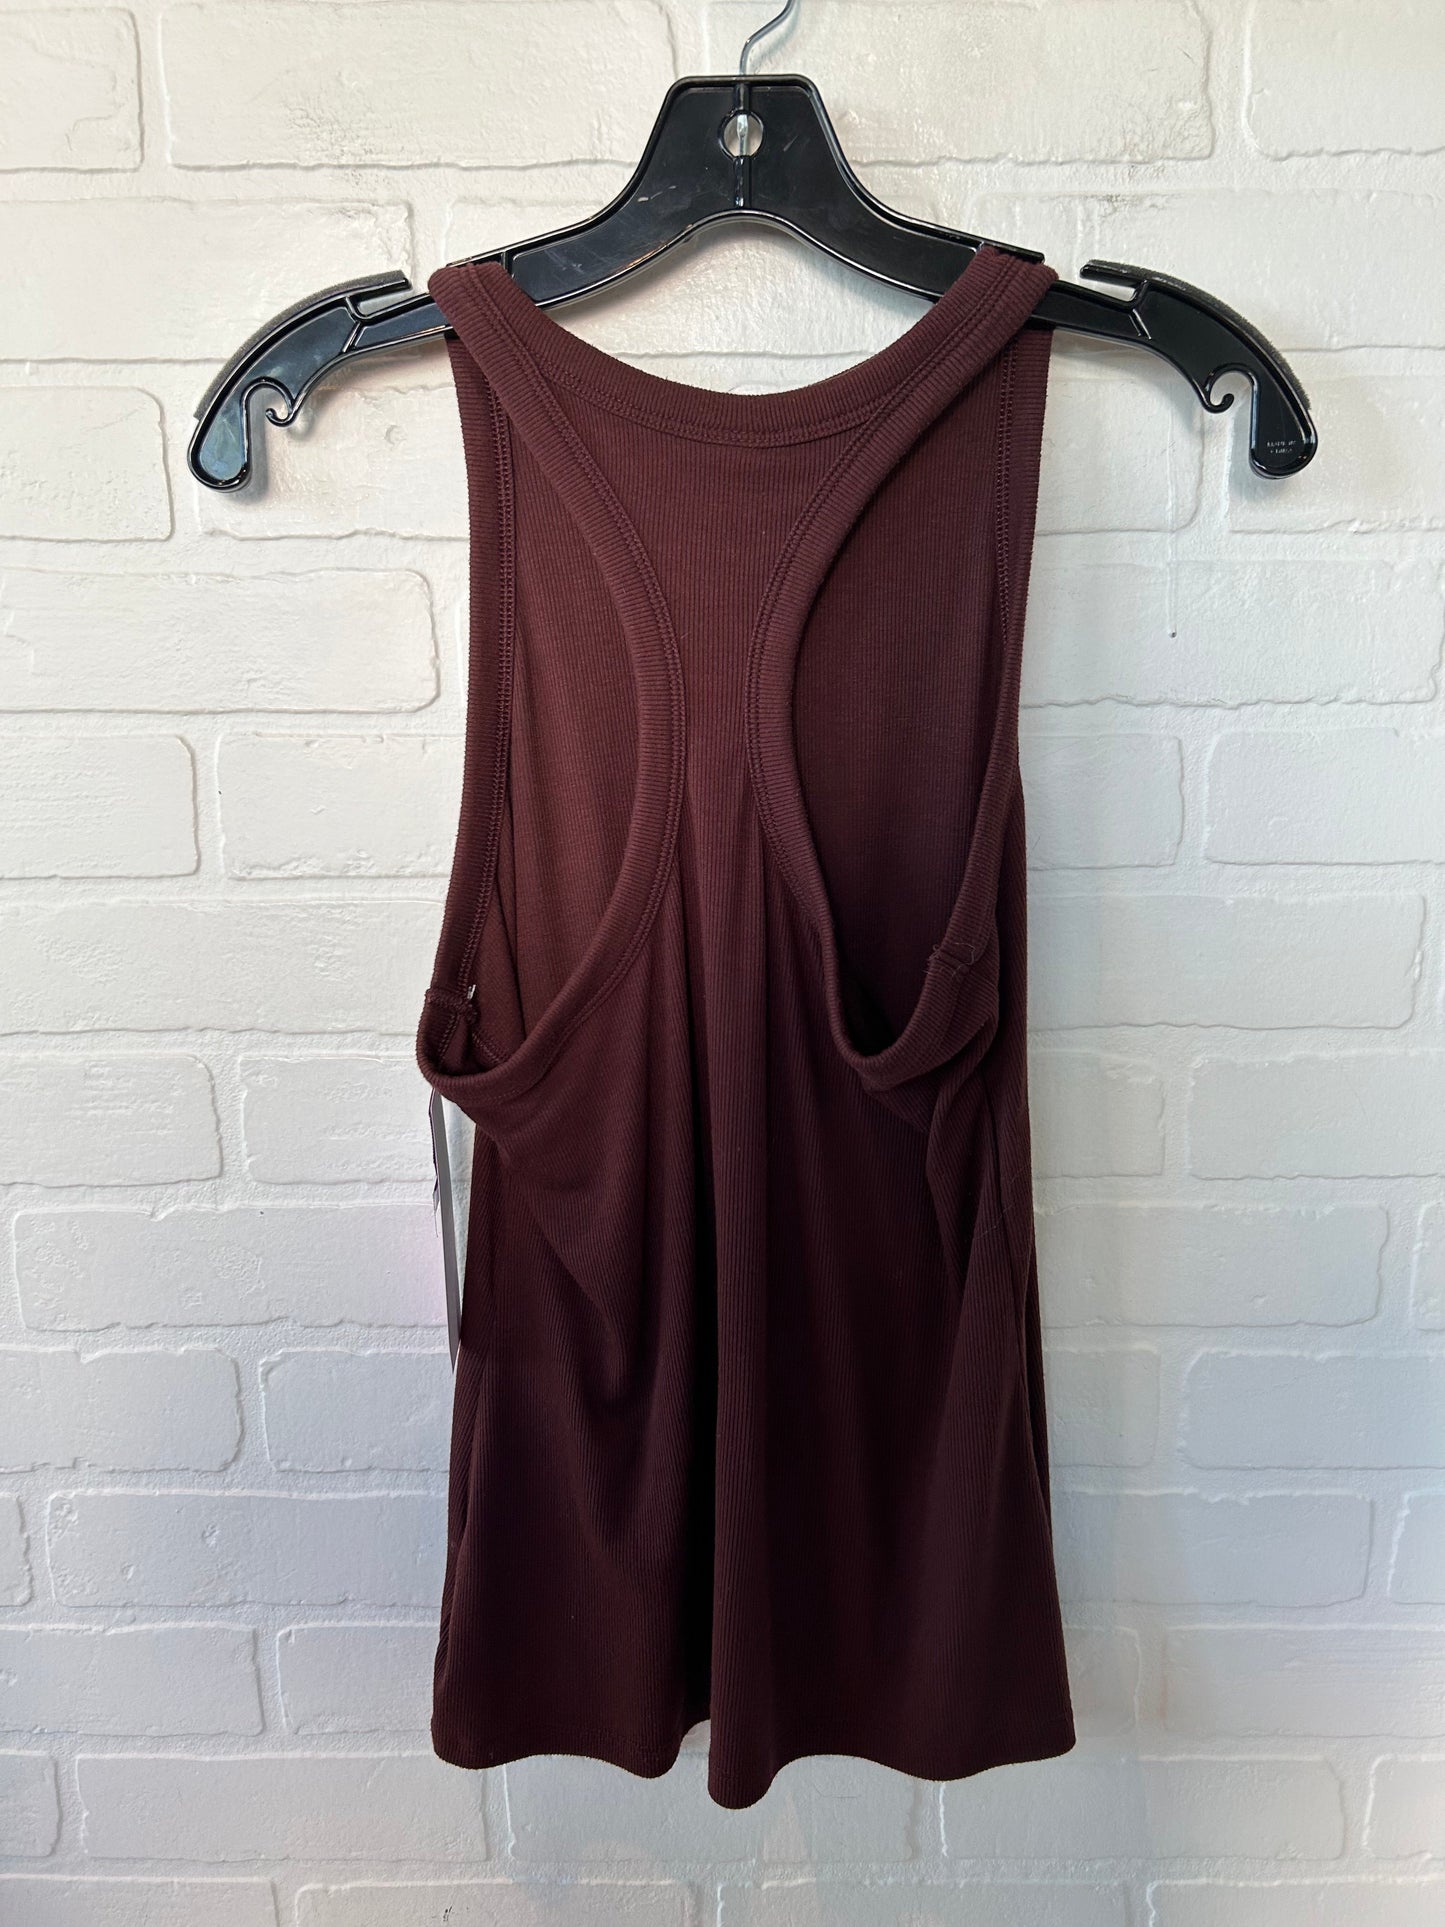 Brown Tank Top Old Navy, Size M